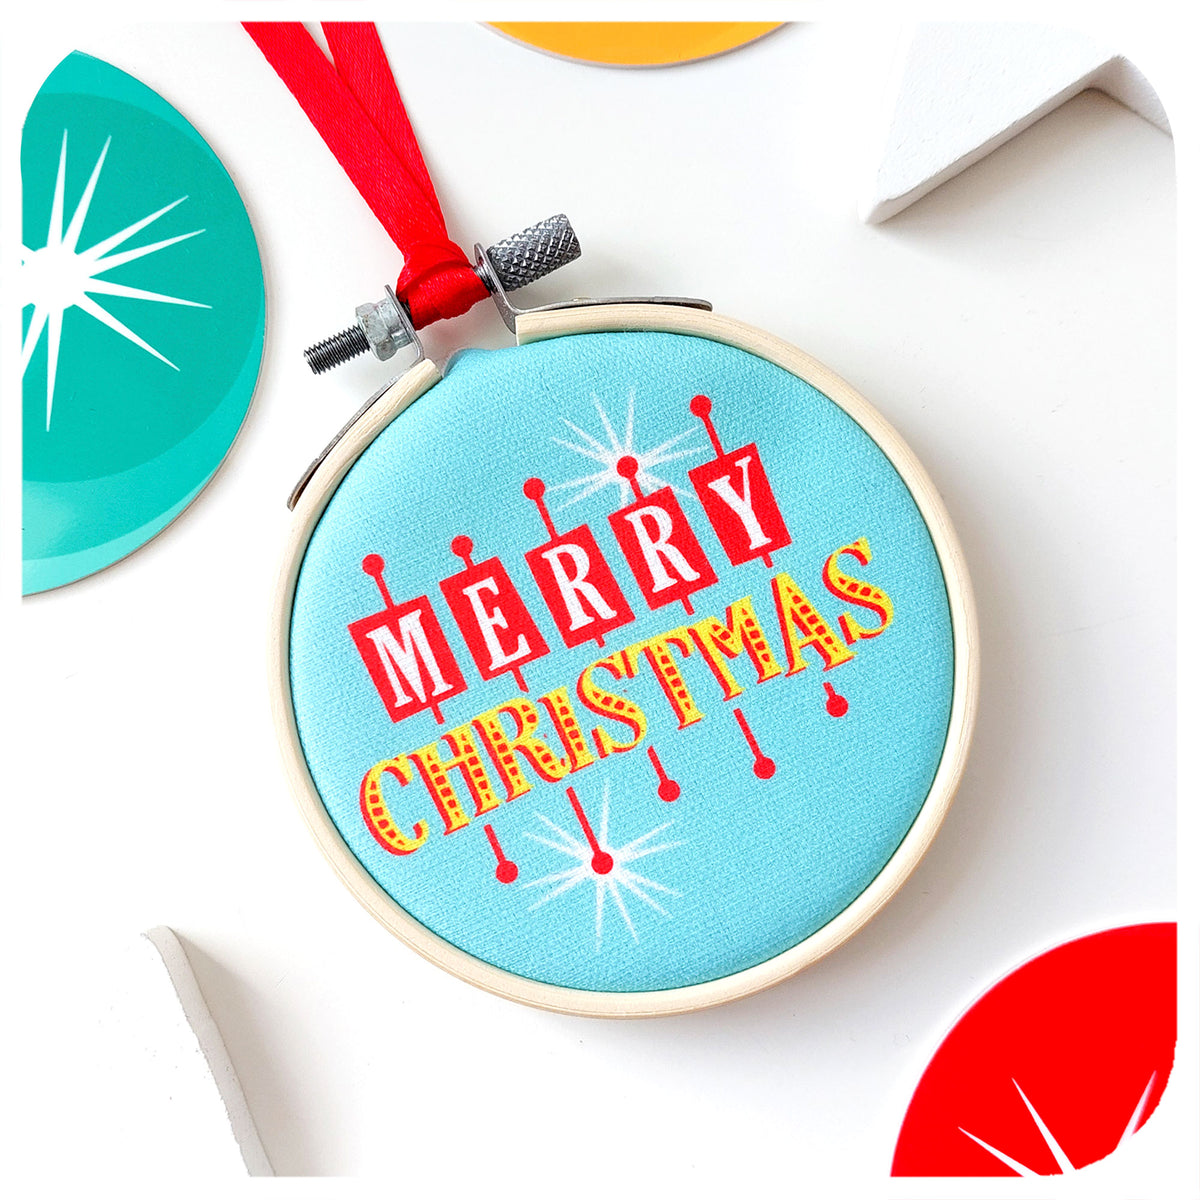 A printed fabric Christmas tree decoration in Atomic Era style on a white background surrounded by colourful Christmas decorations | The Inkabilly Emporium